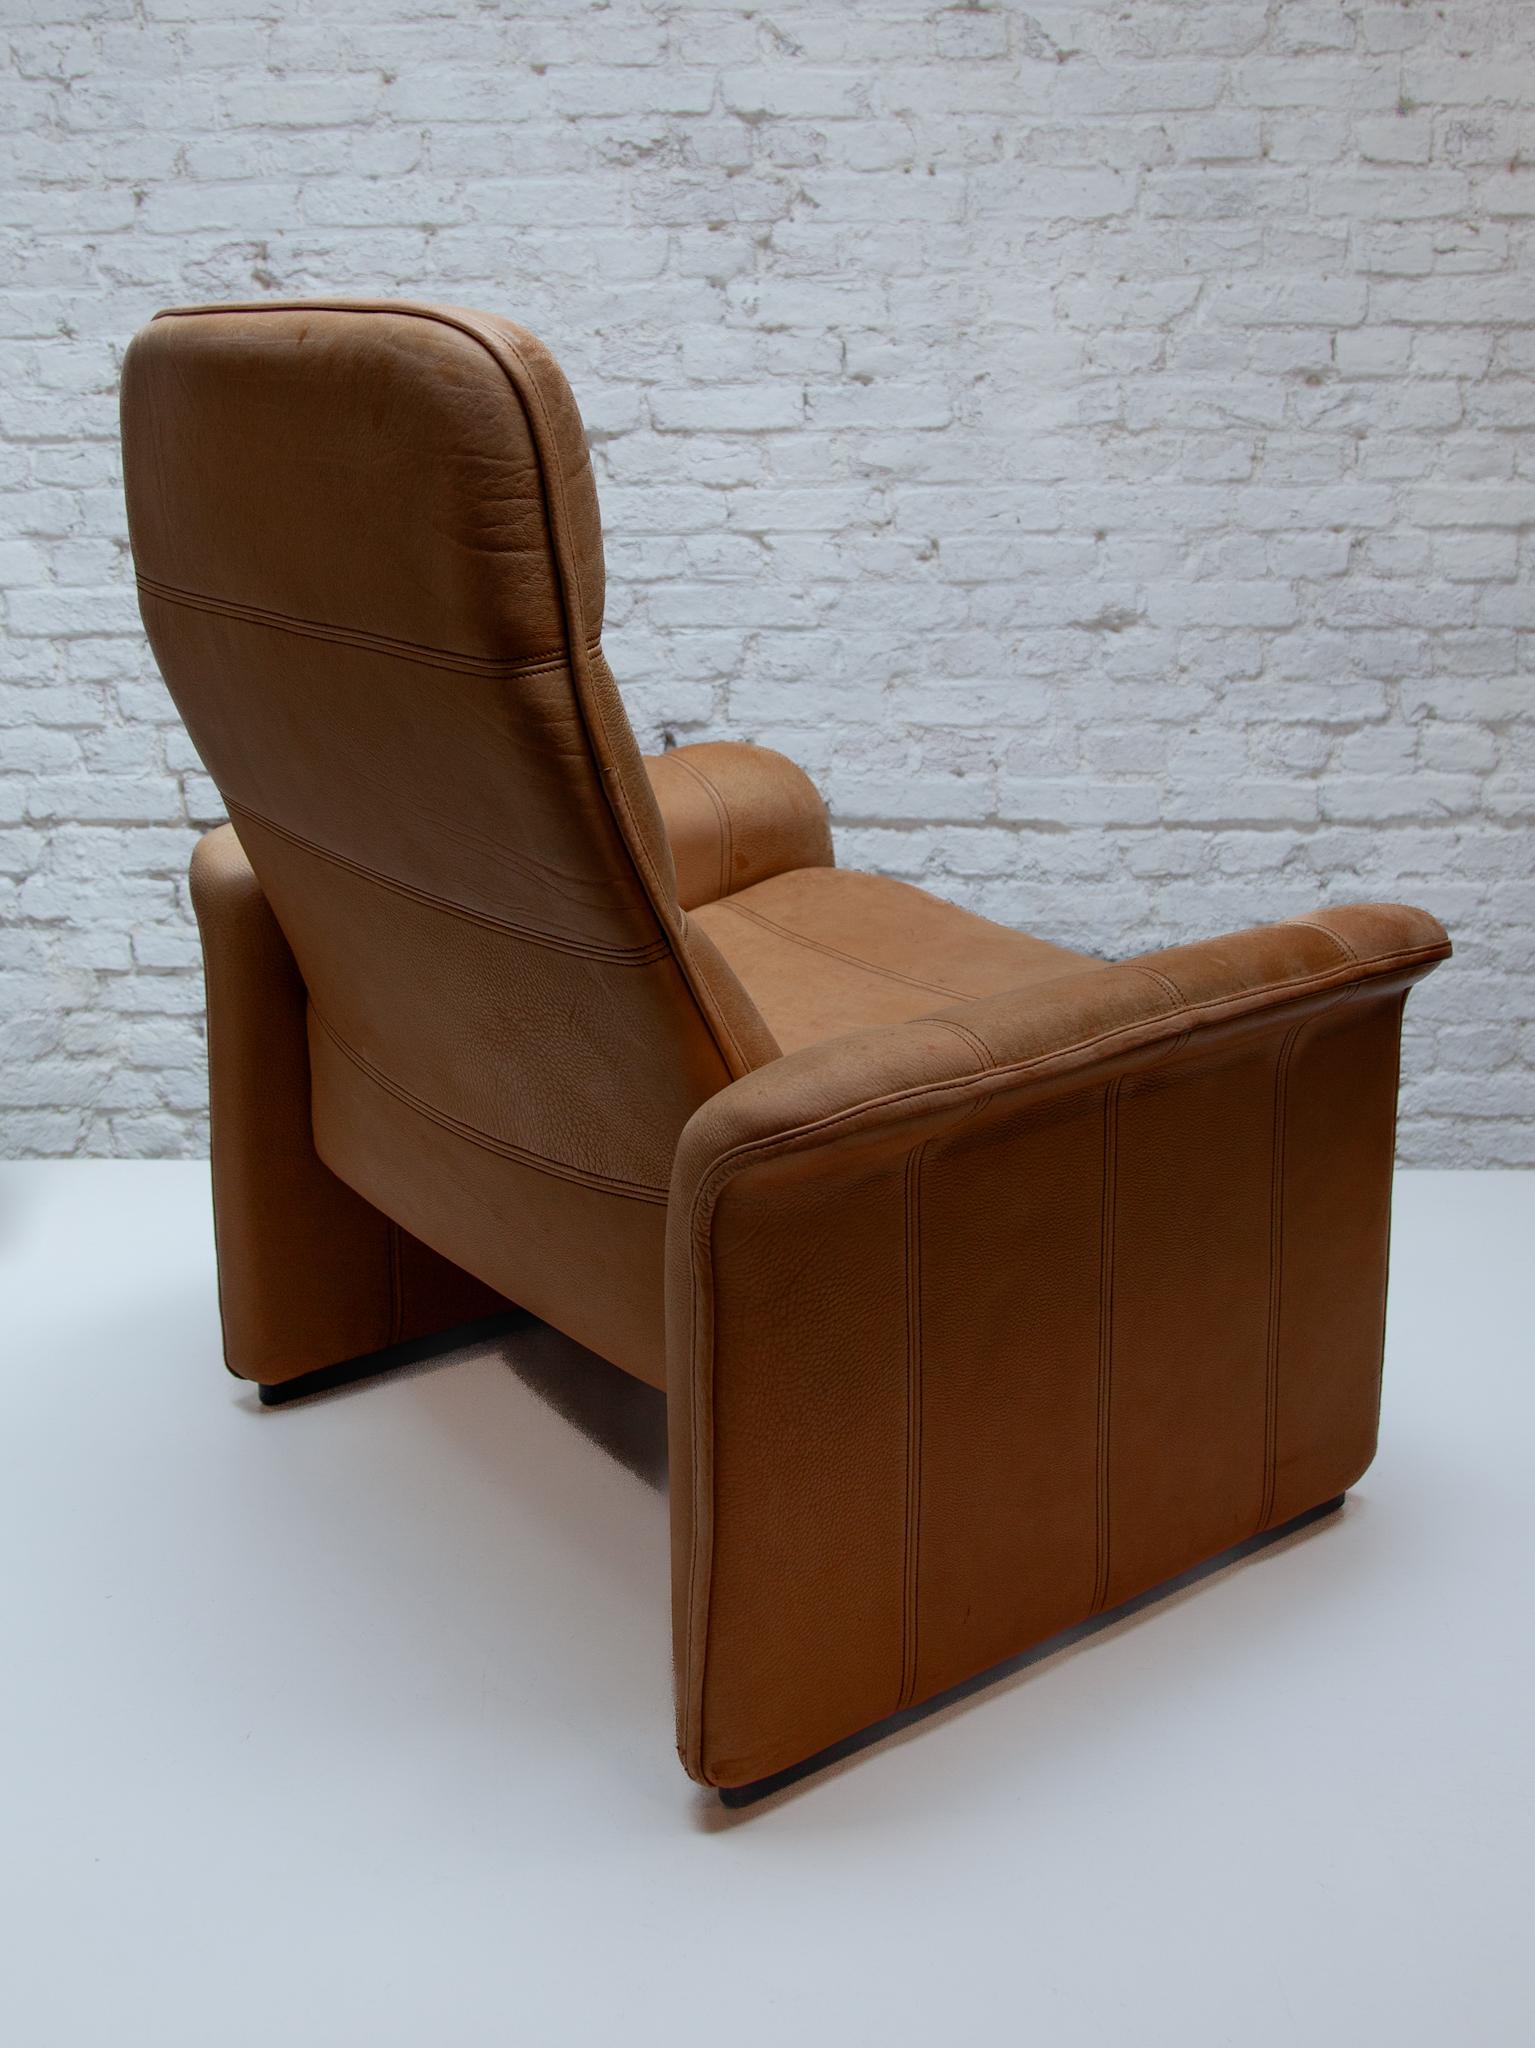 DS-50 Camel Buffalo Neck Leather Lounge Chair & Footstool by De Sede, 1970s In Good Condition For Sale In Antwerp, BE